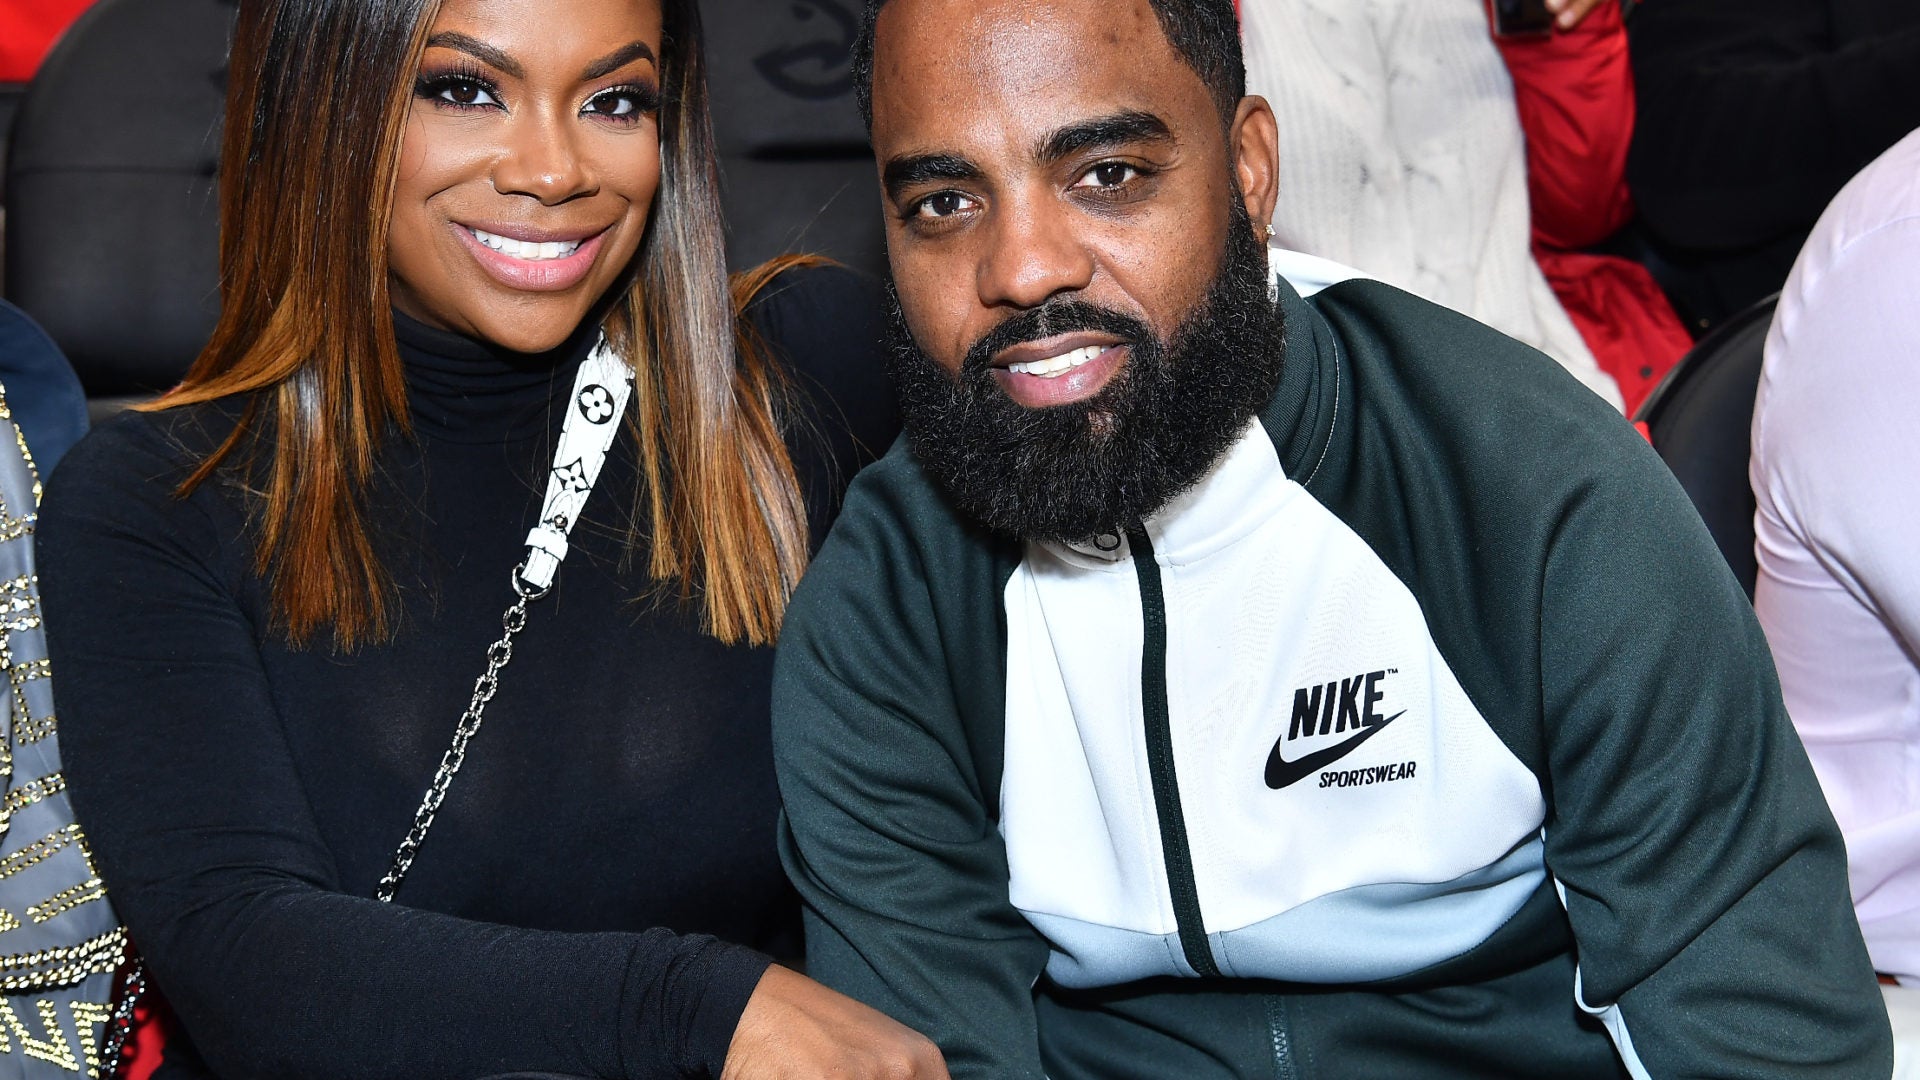 Kandi Burruss and Todd Tucker Are Expecting Another Child Via Surrogate